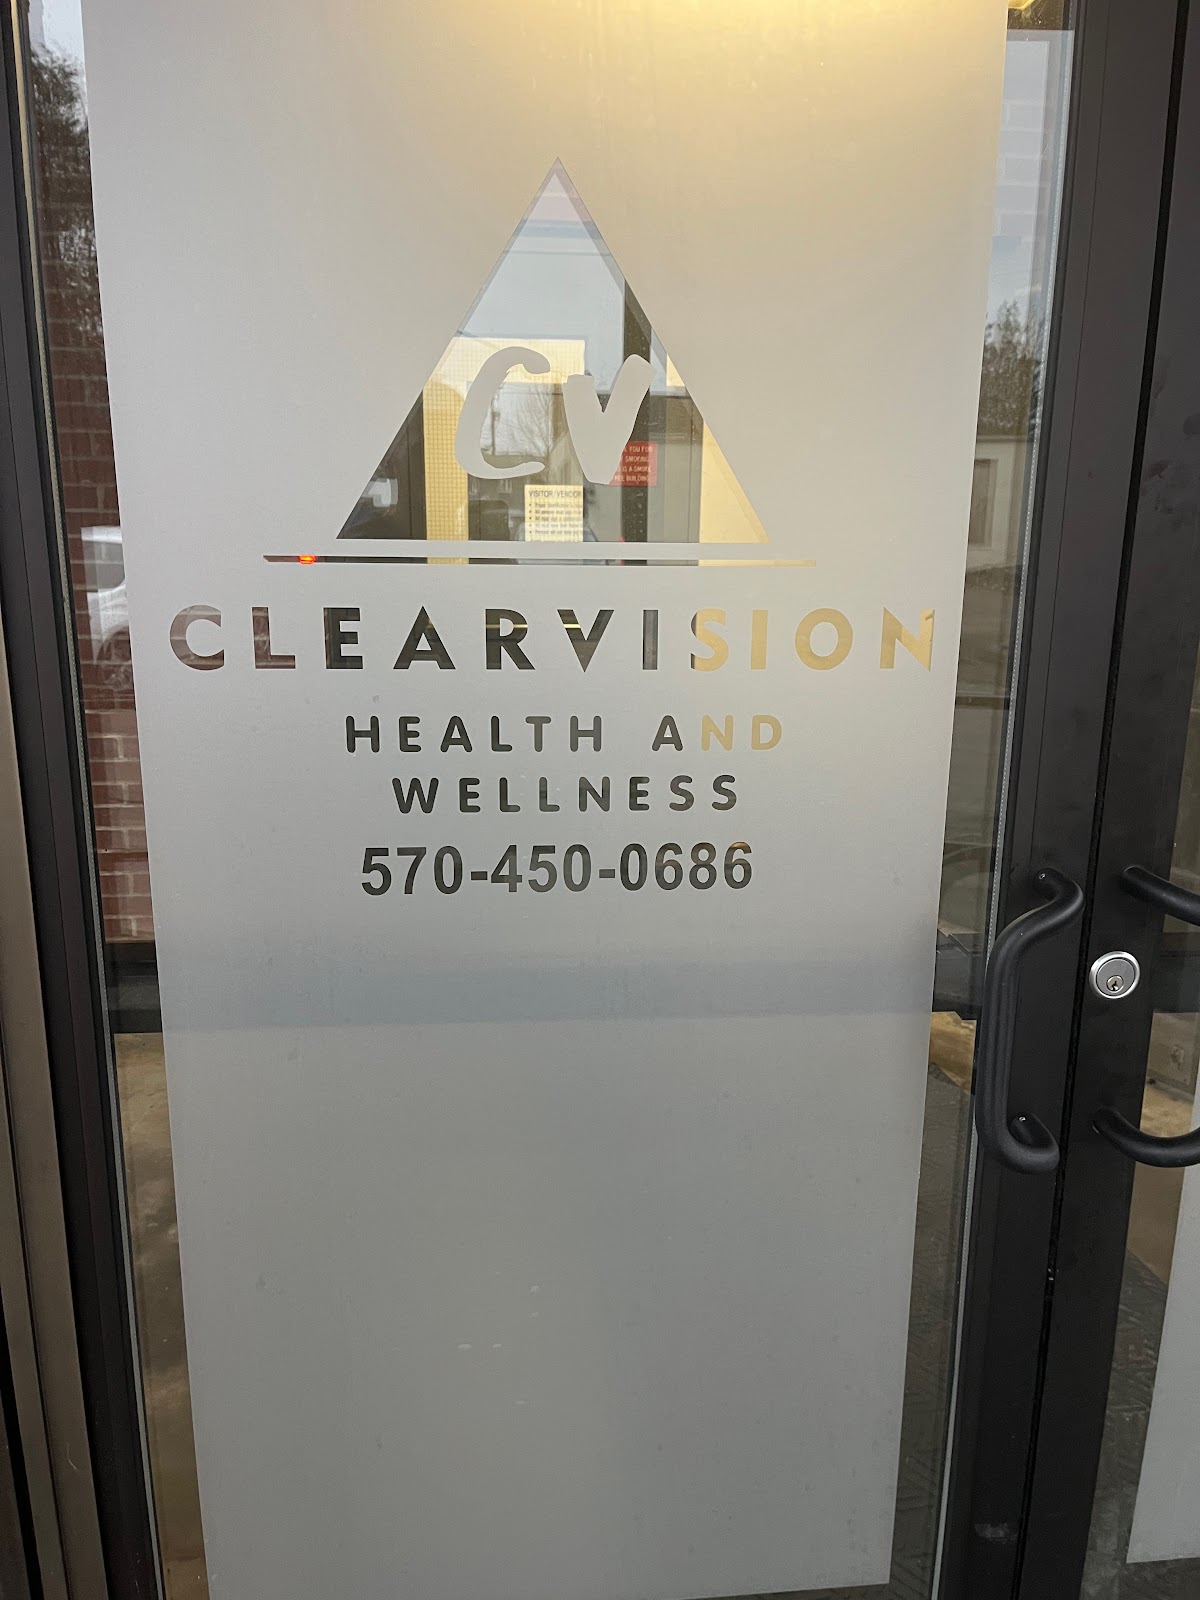 ClearVision Health and Wellness